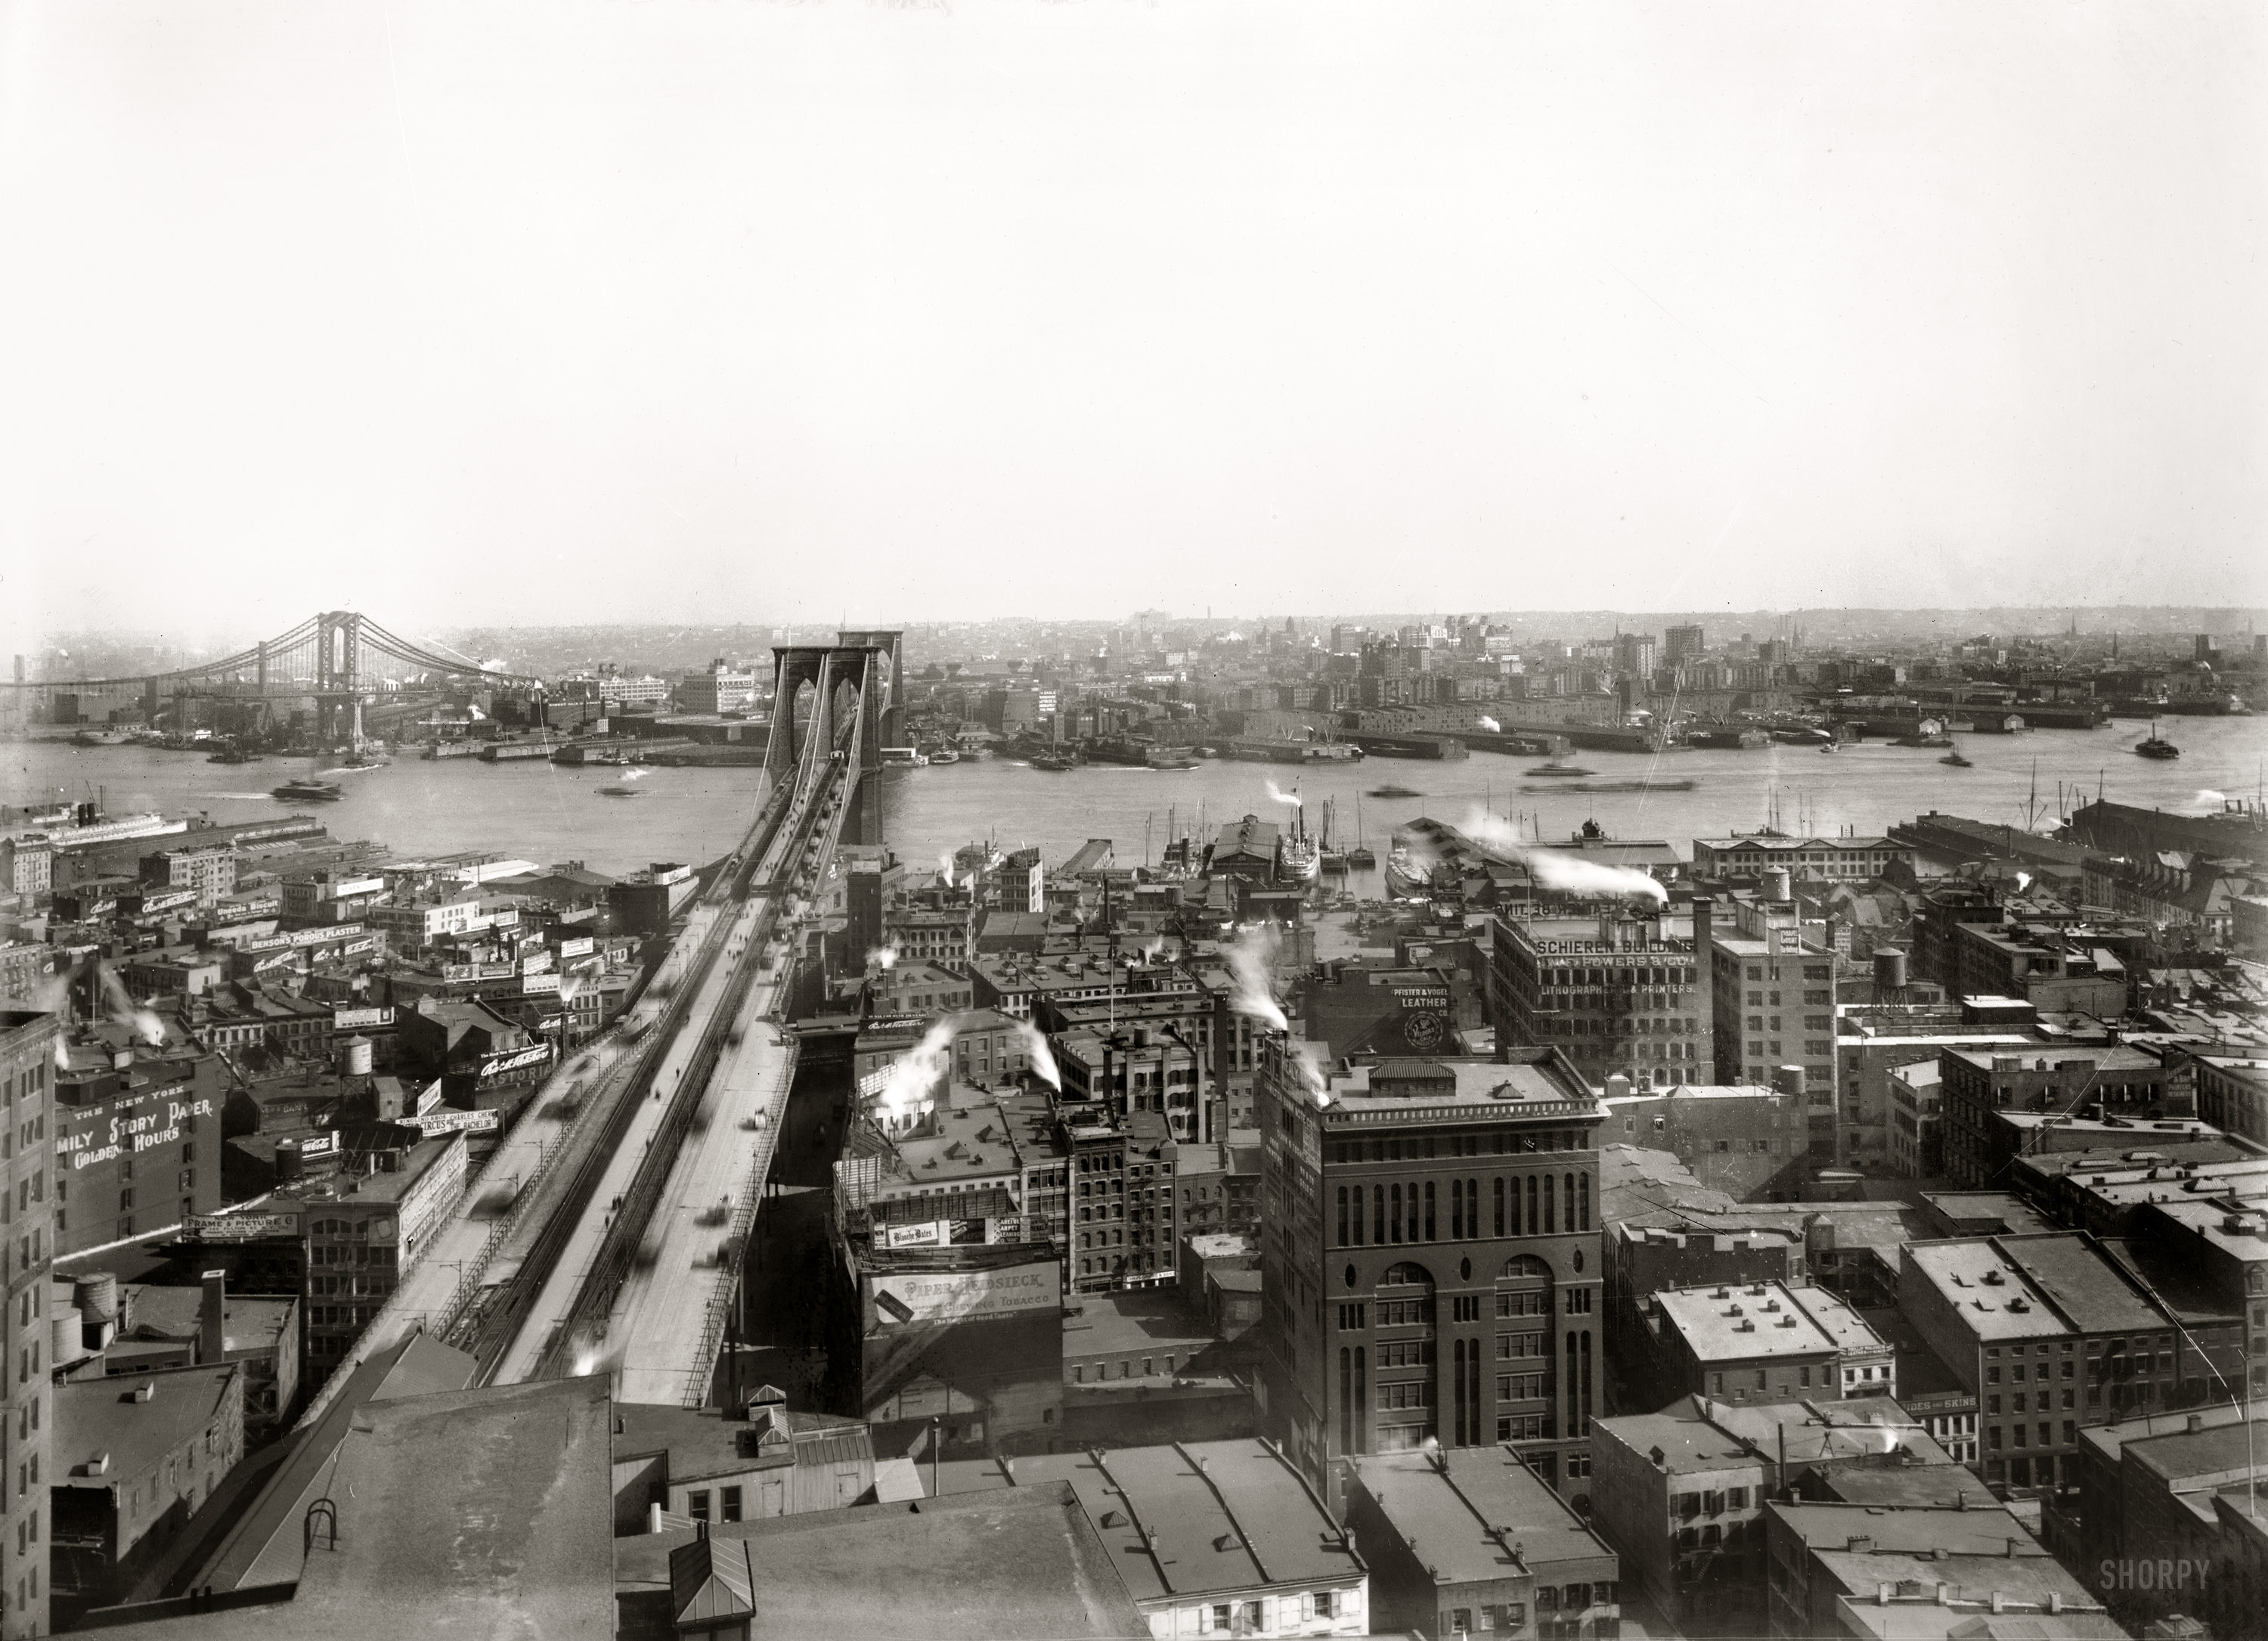 "Brooklyn Bridge and East River. April 1909." At left, the Manhattan Bridge under construction in this view looking east into Brooklyn with Manhattan Terminal at lower left. 8x10 glass negative, George Grantham Bain Collection. View full size.